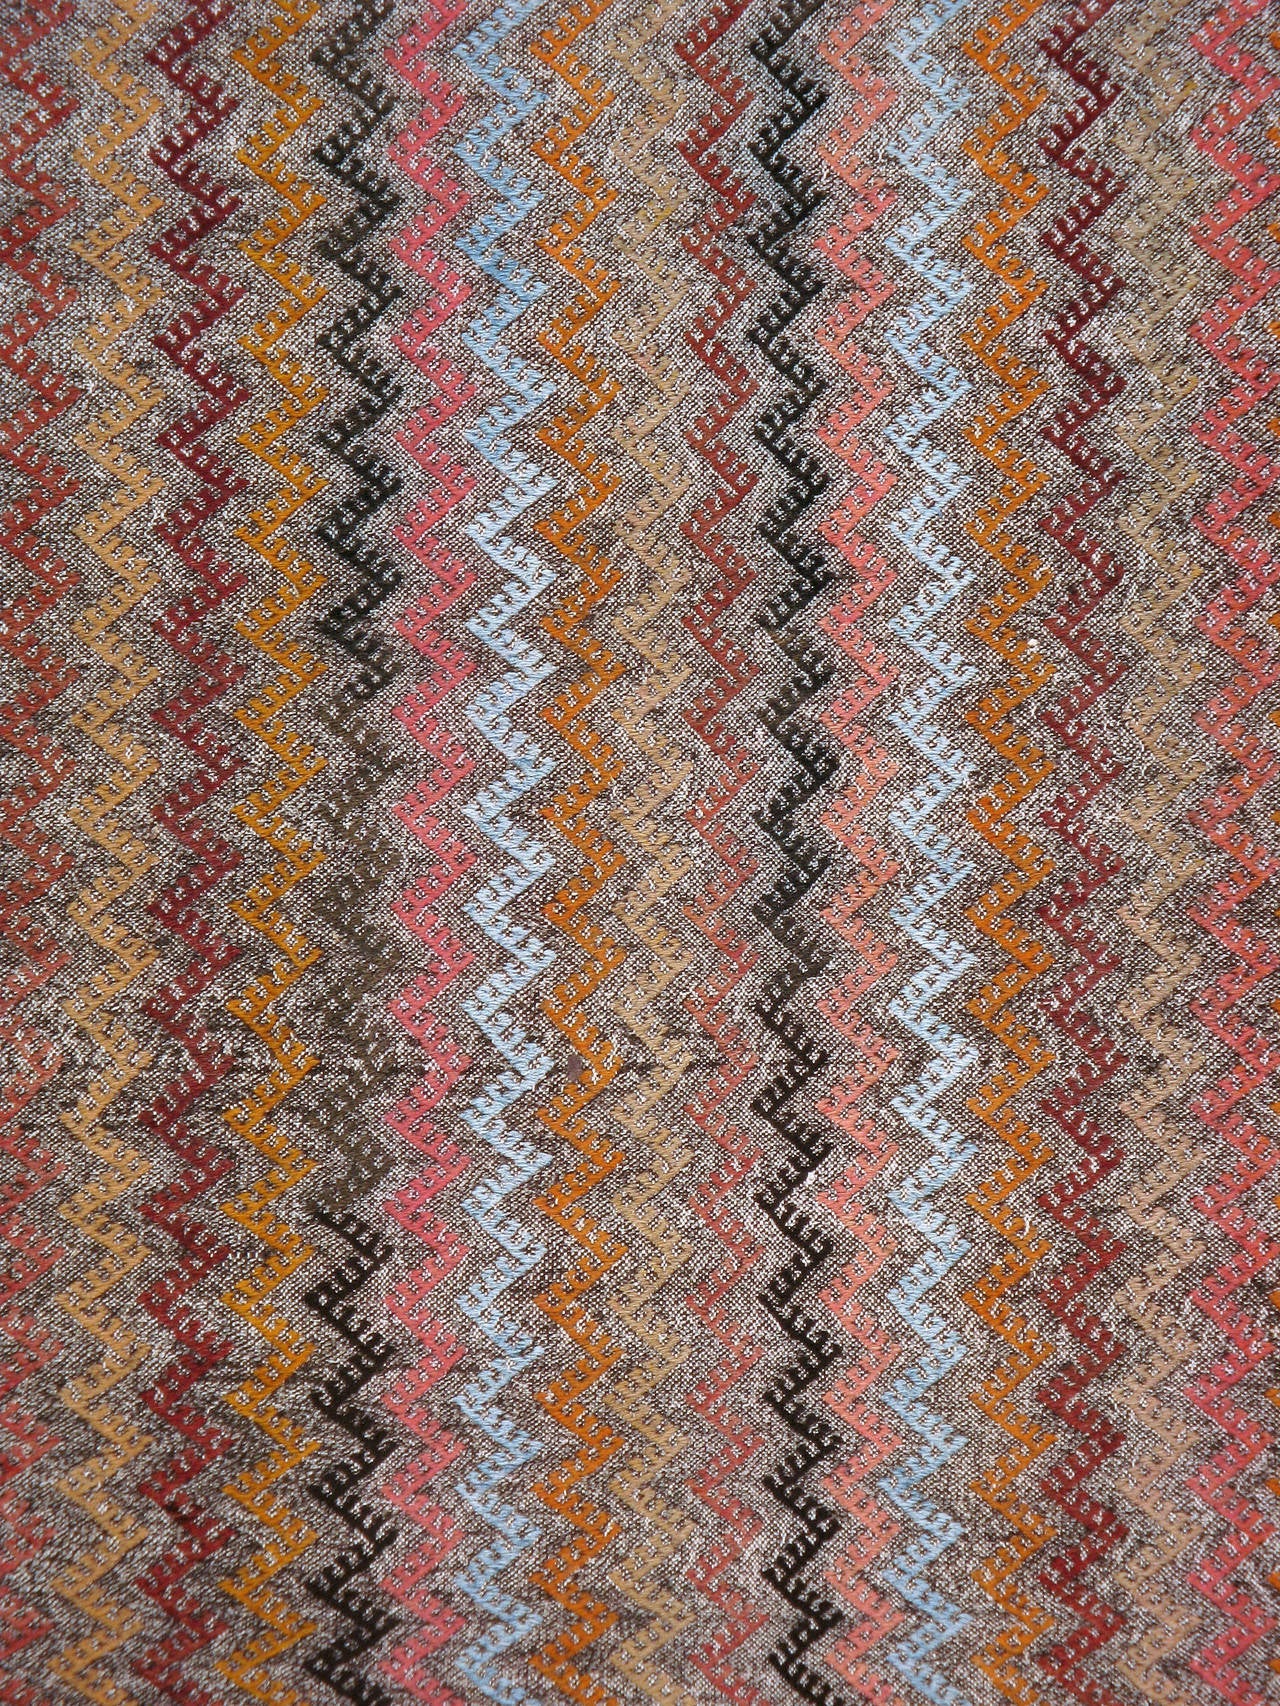 A vintage Turkish flat-woven Kilim carpet from the second quarter of the 20th century.